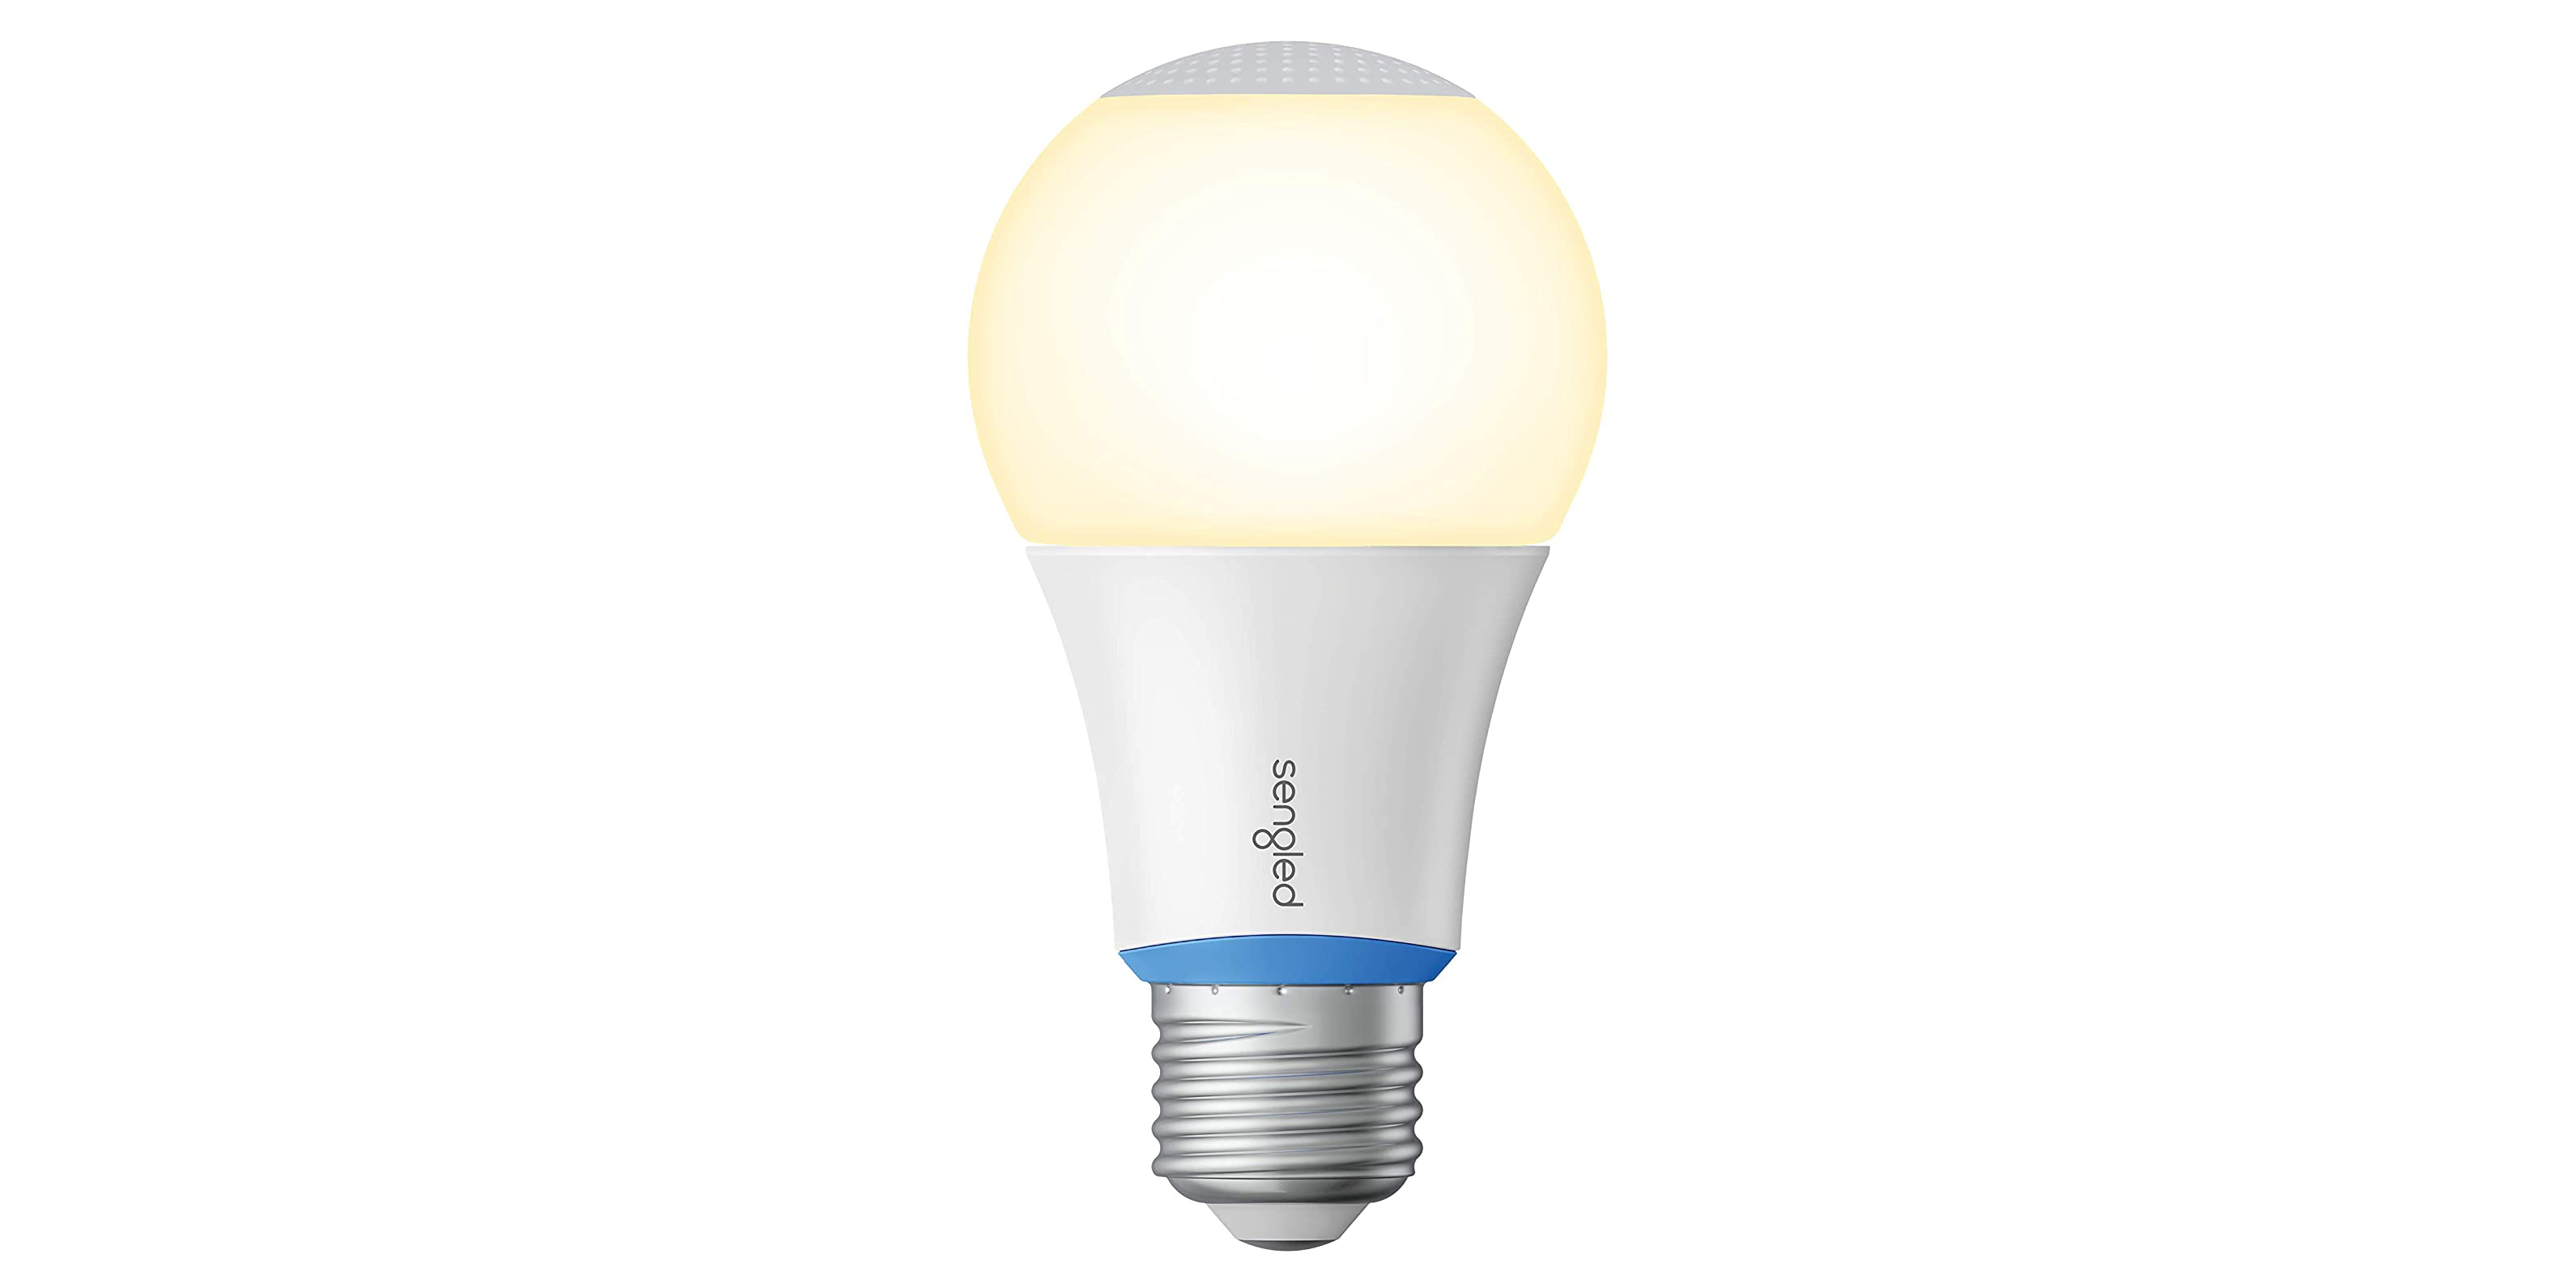 Get a Sengled smart LED light bulb for $14, more in today’s Green Deals